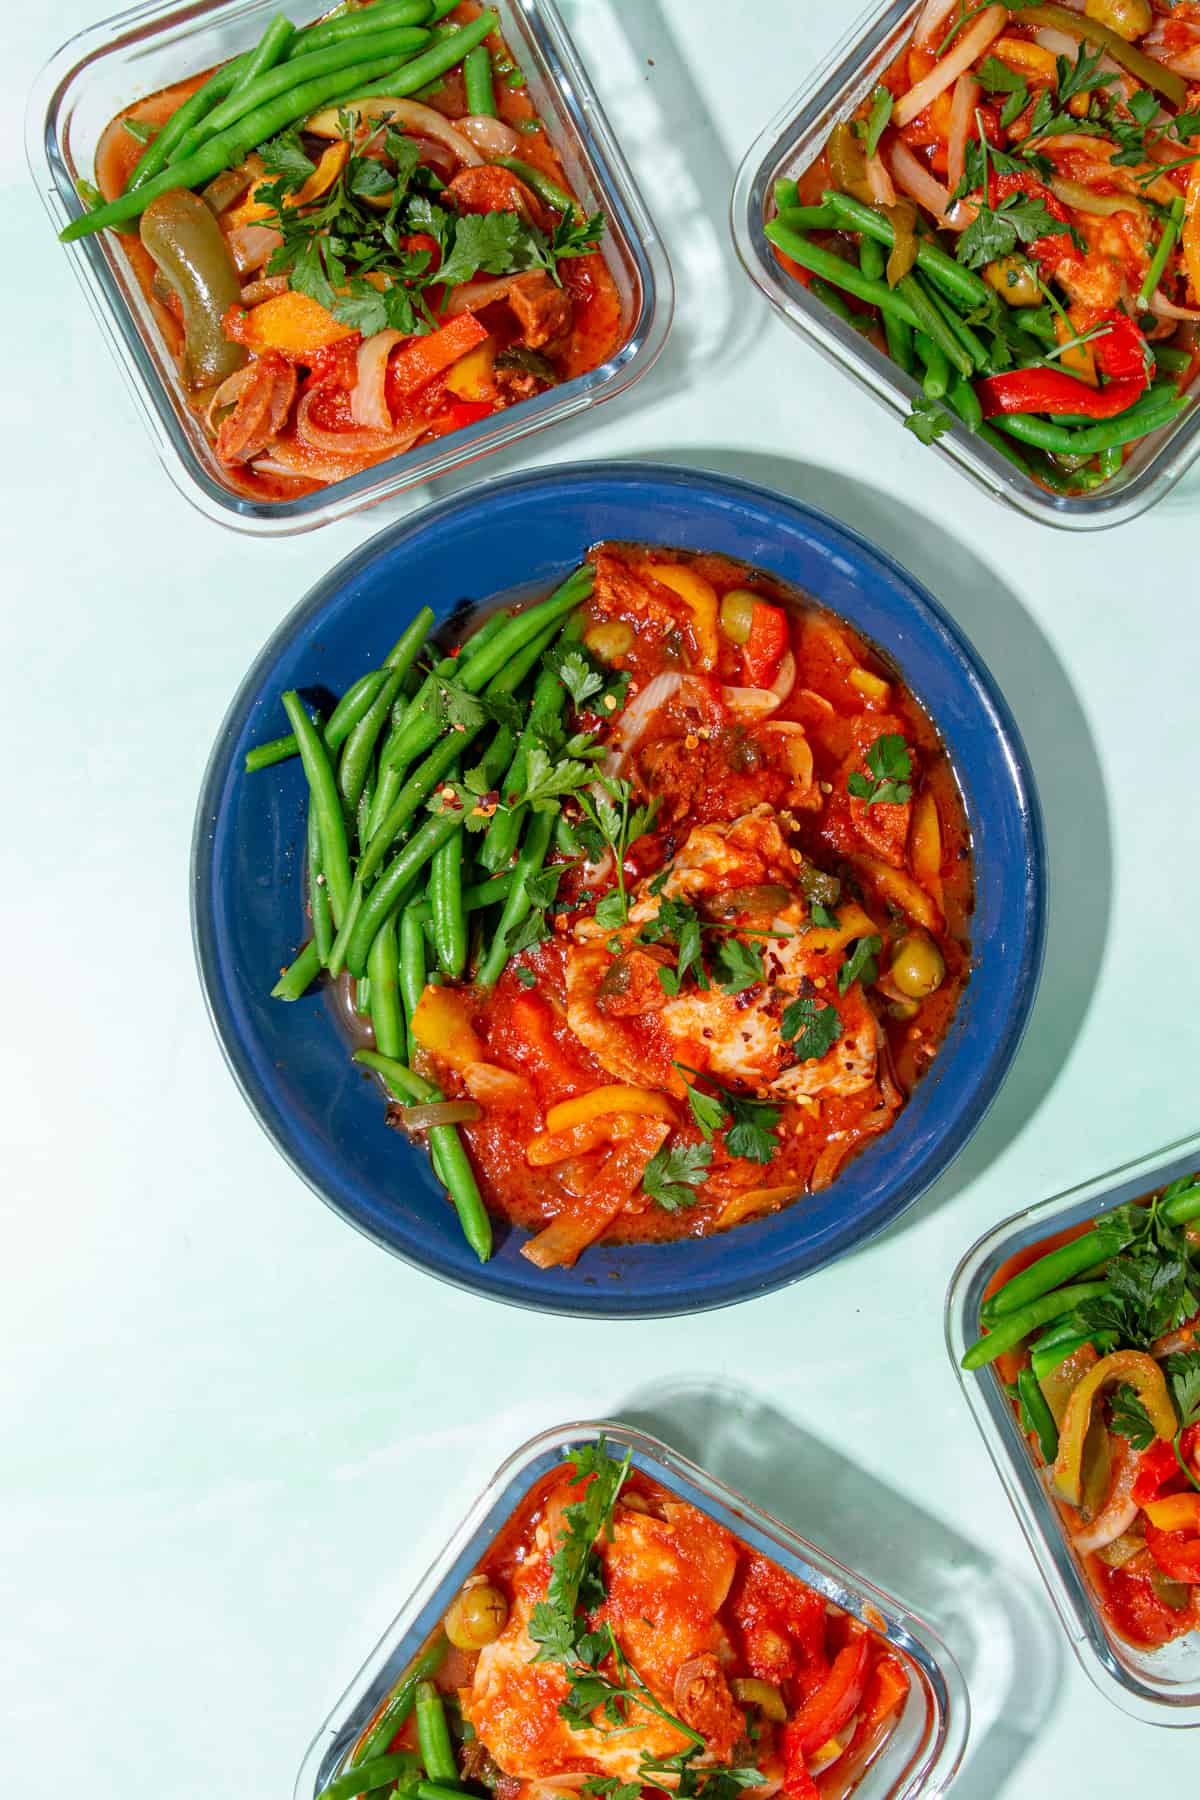 A blue dish with chicken in a tomatoes sauce with olives and peppers and a side of green beans, with 4 square glass meal prep containers filled with the same ingredients.